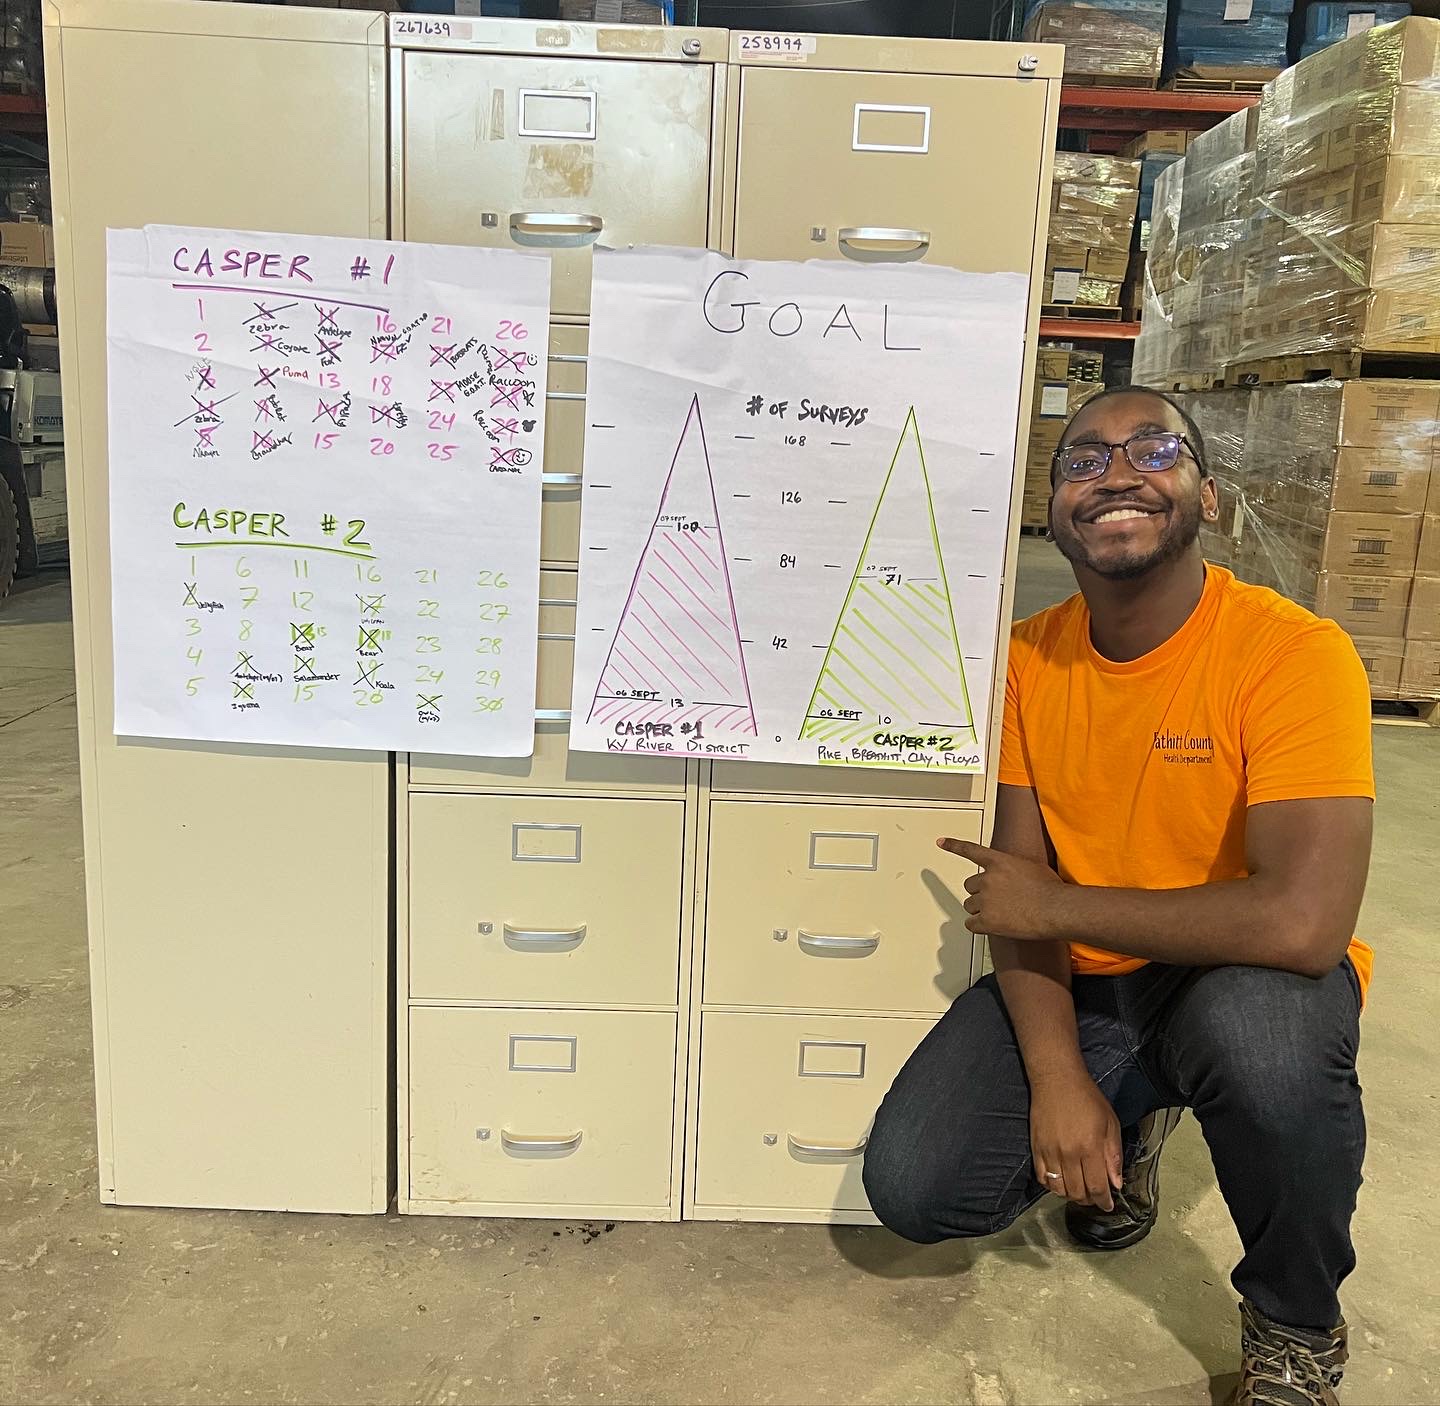 Brandon is in an orange t-shit squatting down near two metal cabinets. He is pointing to two sheets of paper that show the goal number of CASPER interviews being met.